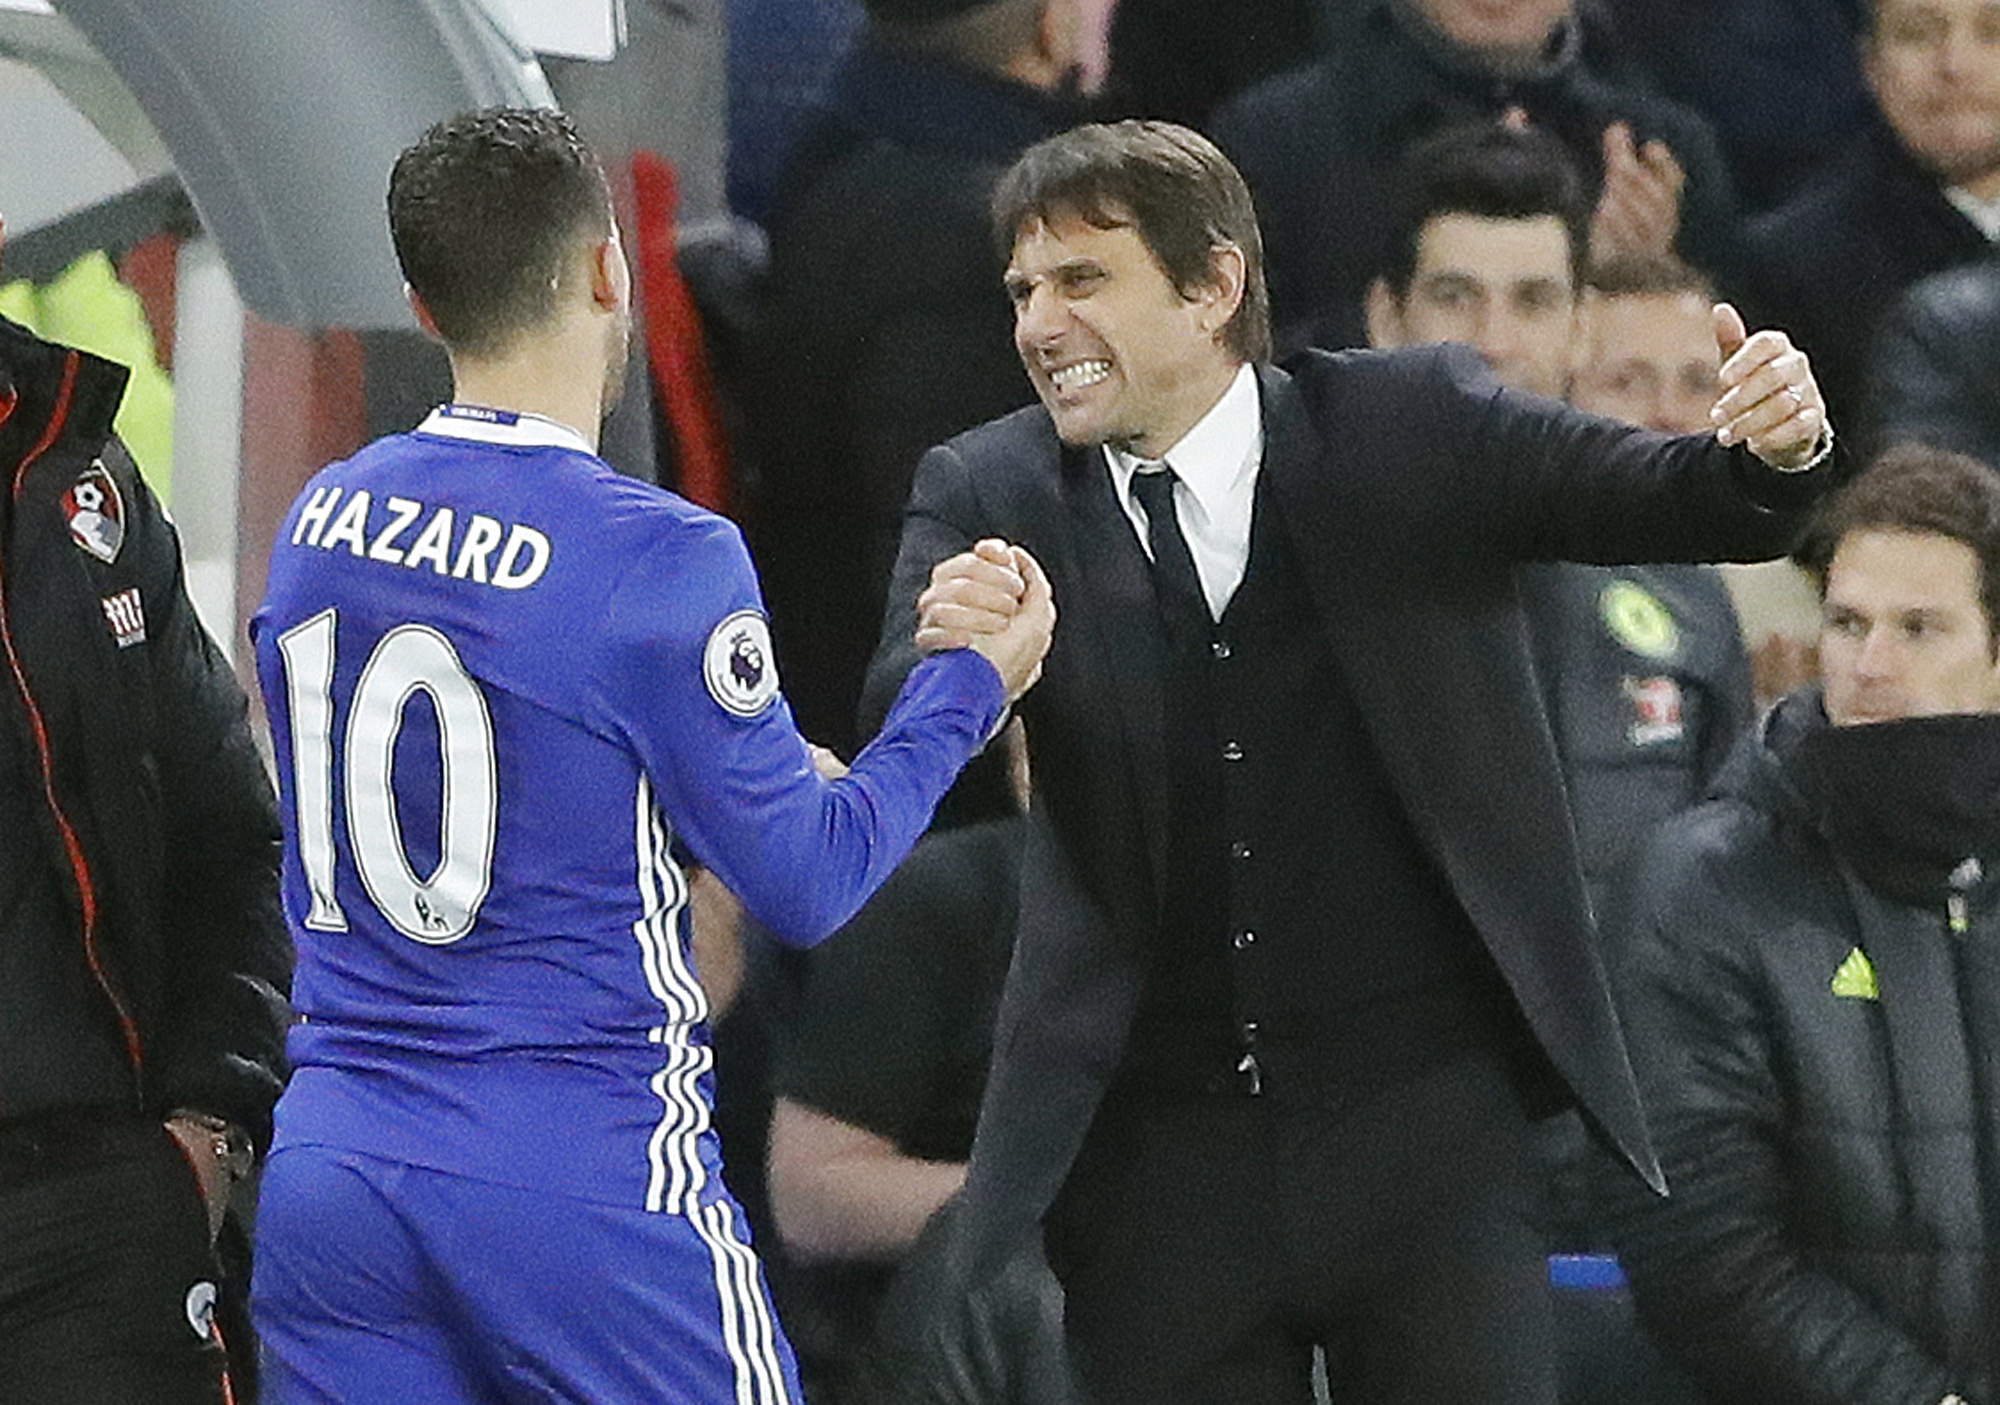 Chelsea's Eden Hazard, left, and Chelsea's team manager Antonio Conte celebrate after winning the English Premier League soccer match between Chelsea and Bournemouth at Stamford Bridge stadium in London, Monday, Dec. 26, 2016. AP